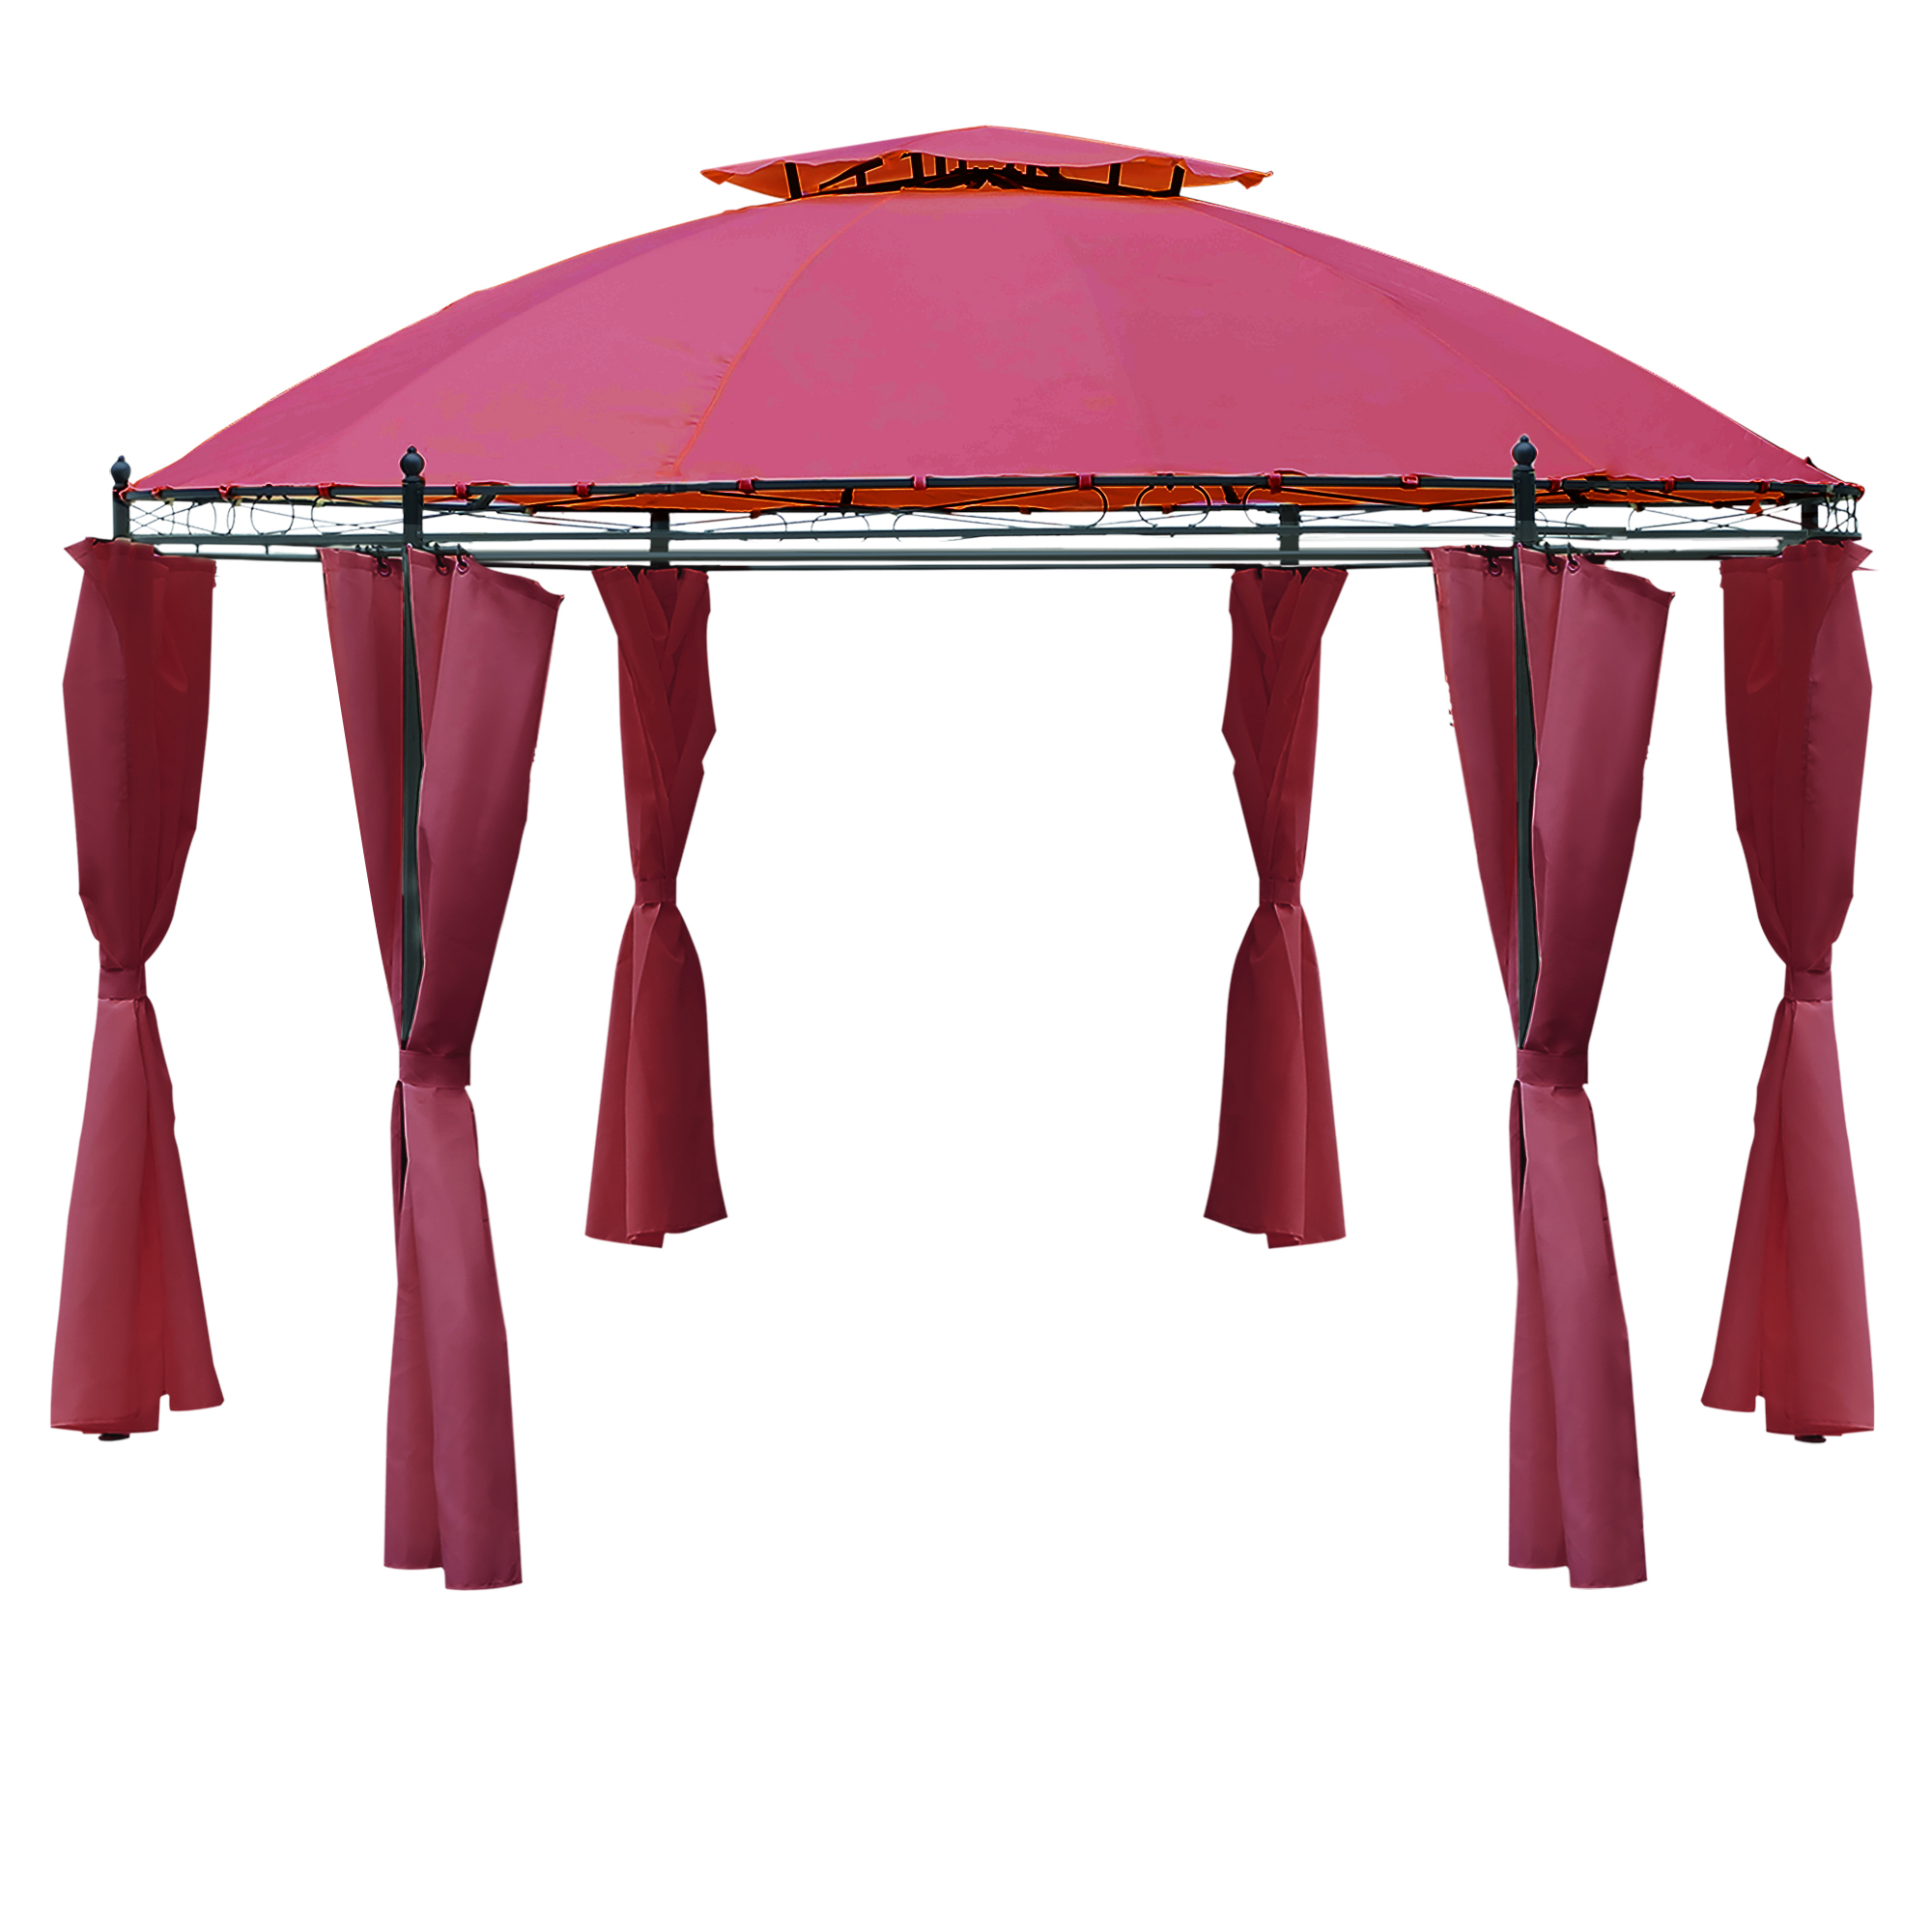 OutsunnyÂ 11.5' Patio Gazebo, Outdoor Gazebo Canopy Shelter with Curtains, Romantic Round Double Roof, Solid Steel Frame for Garden, Lawn, Backyard and Deck, Wine Red - image 1 of 9